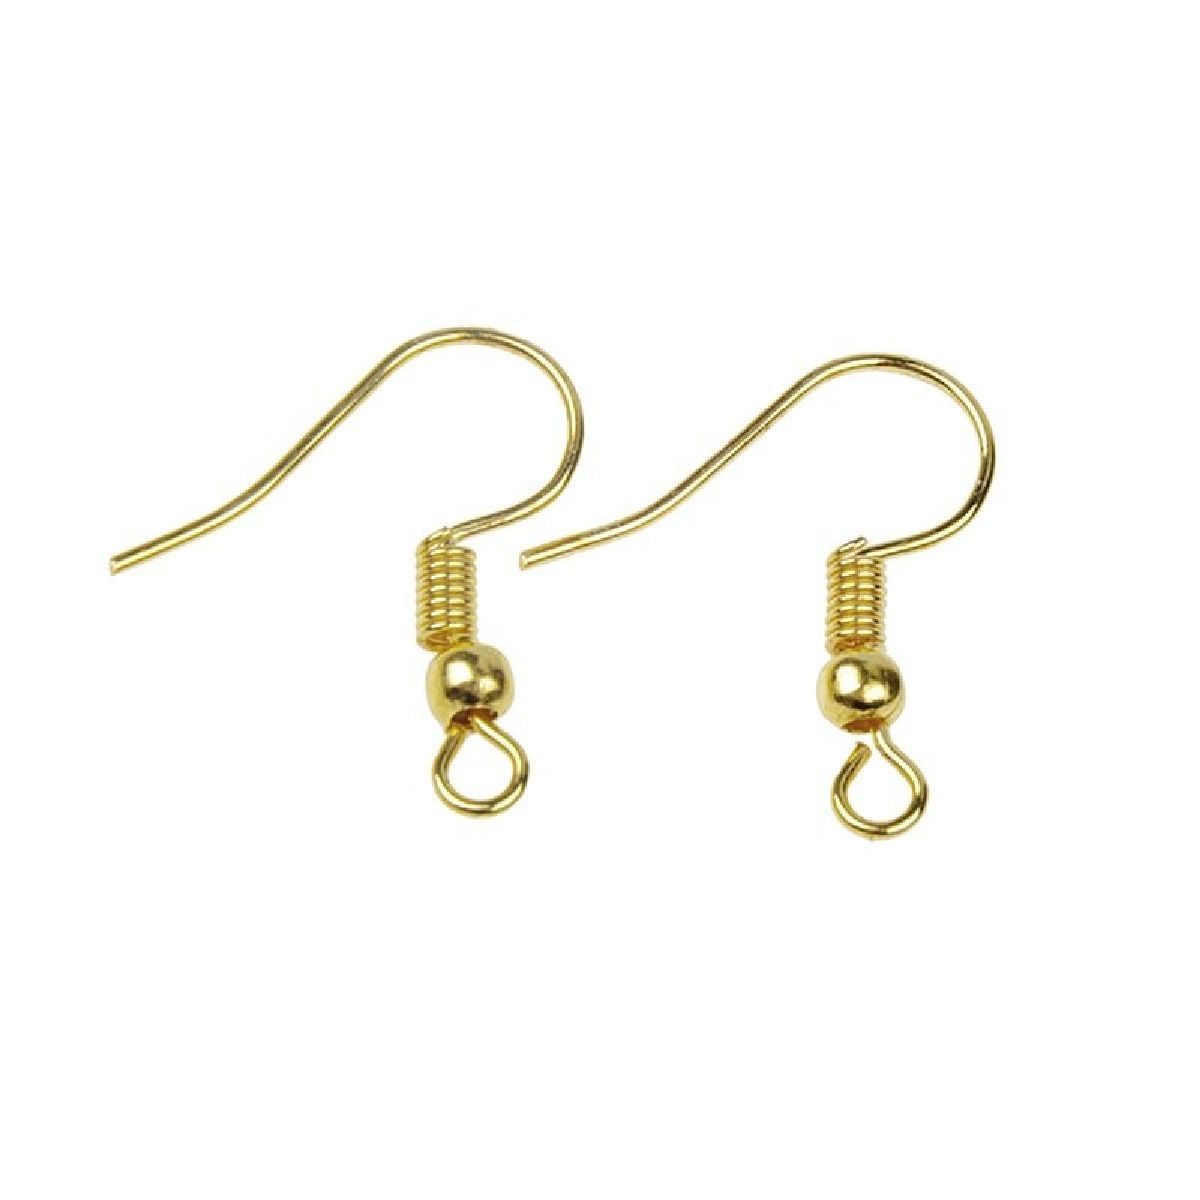 SH304-Flat Fish Hook Earring Wires 14x14mm Gold Filled (Pair